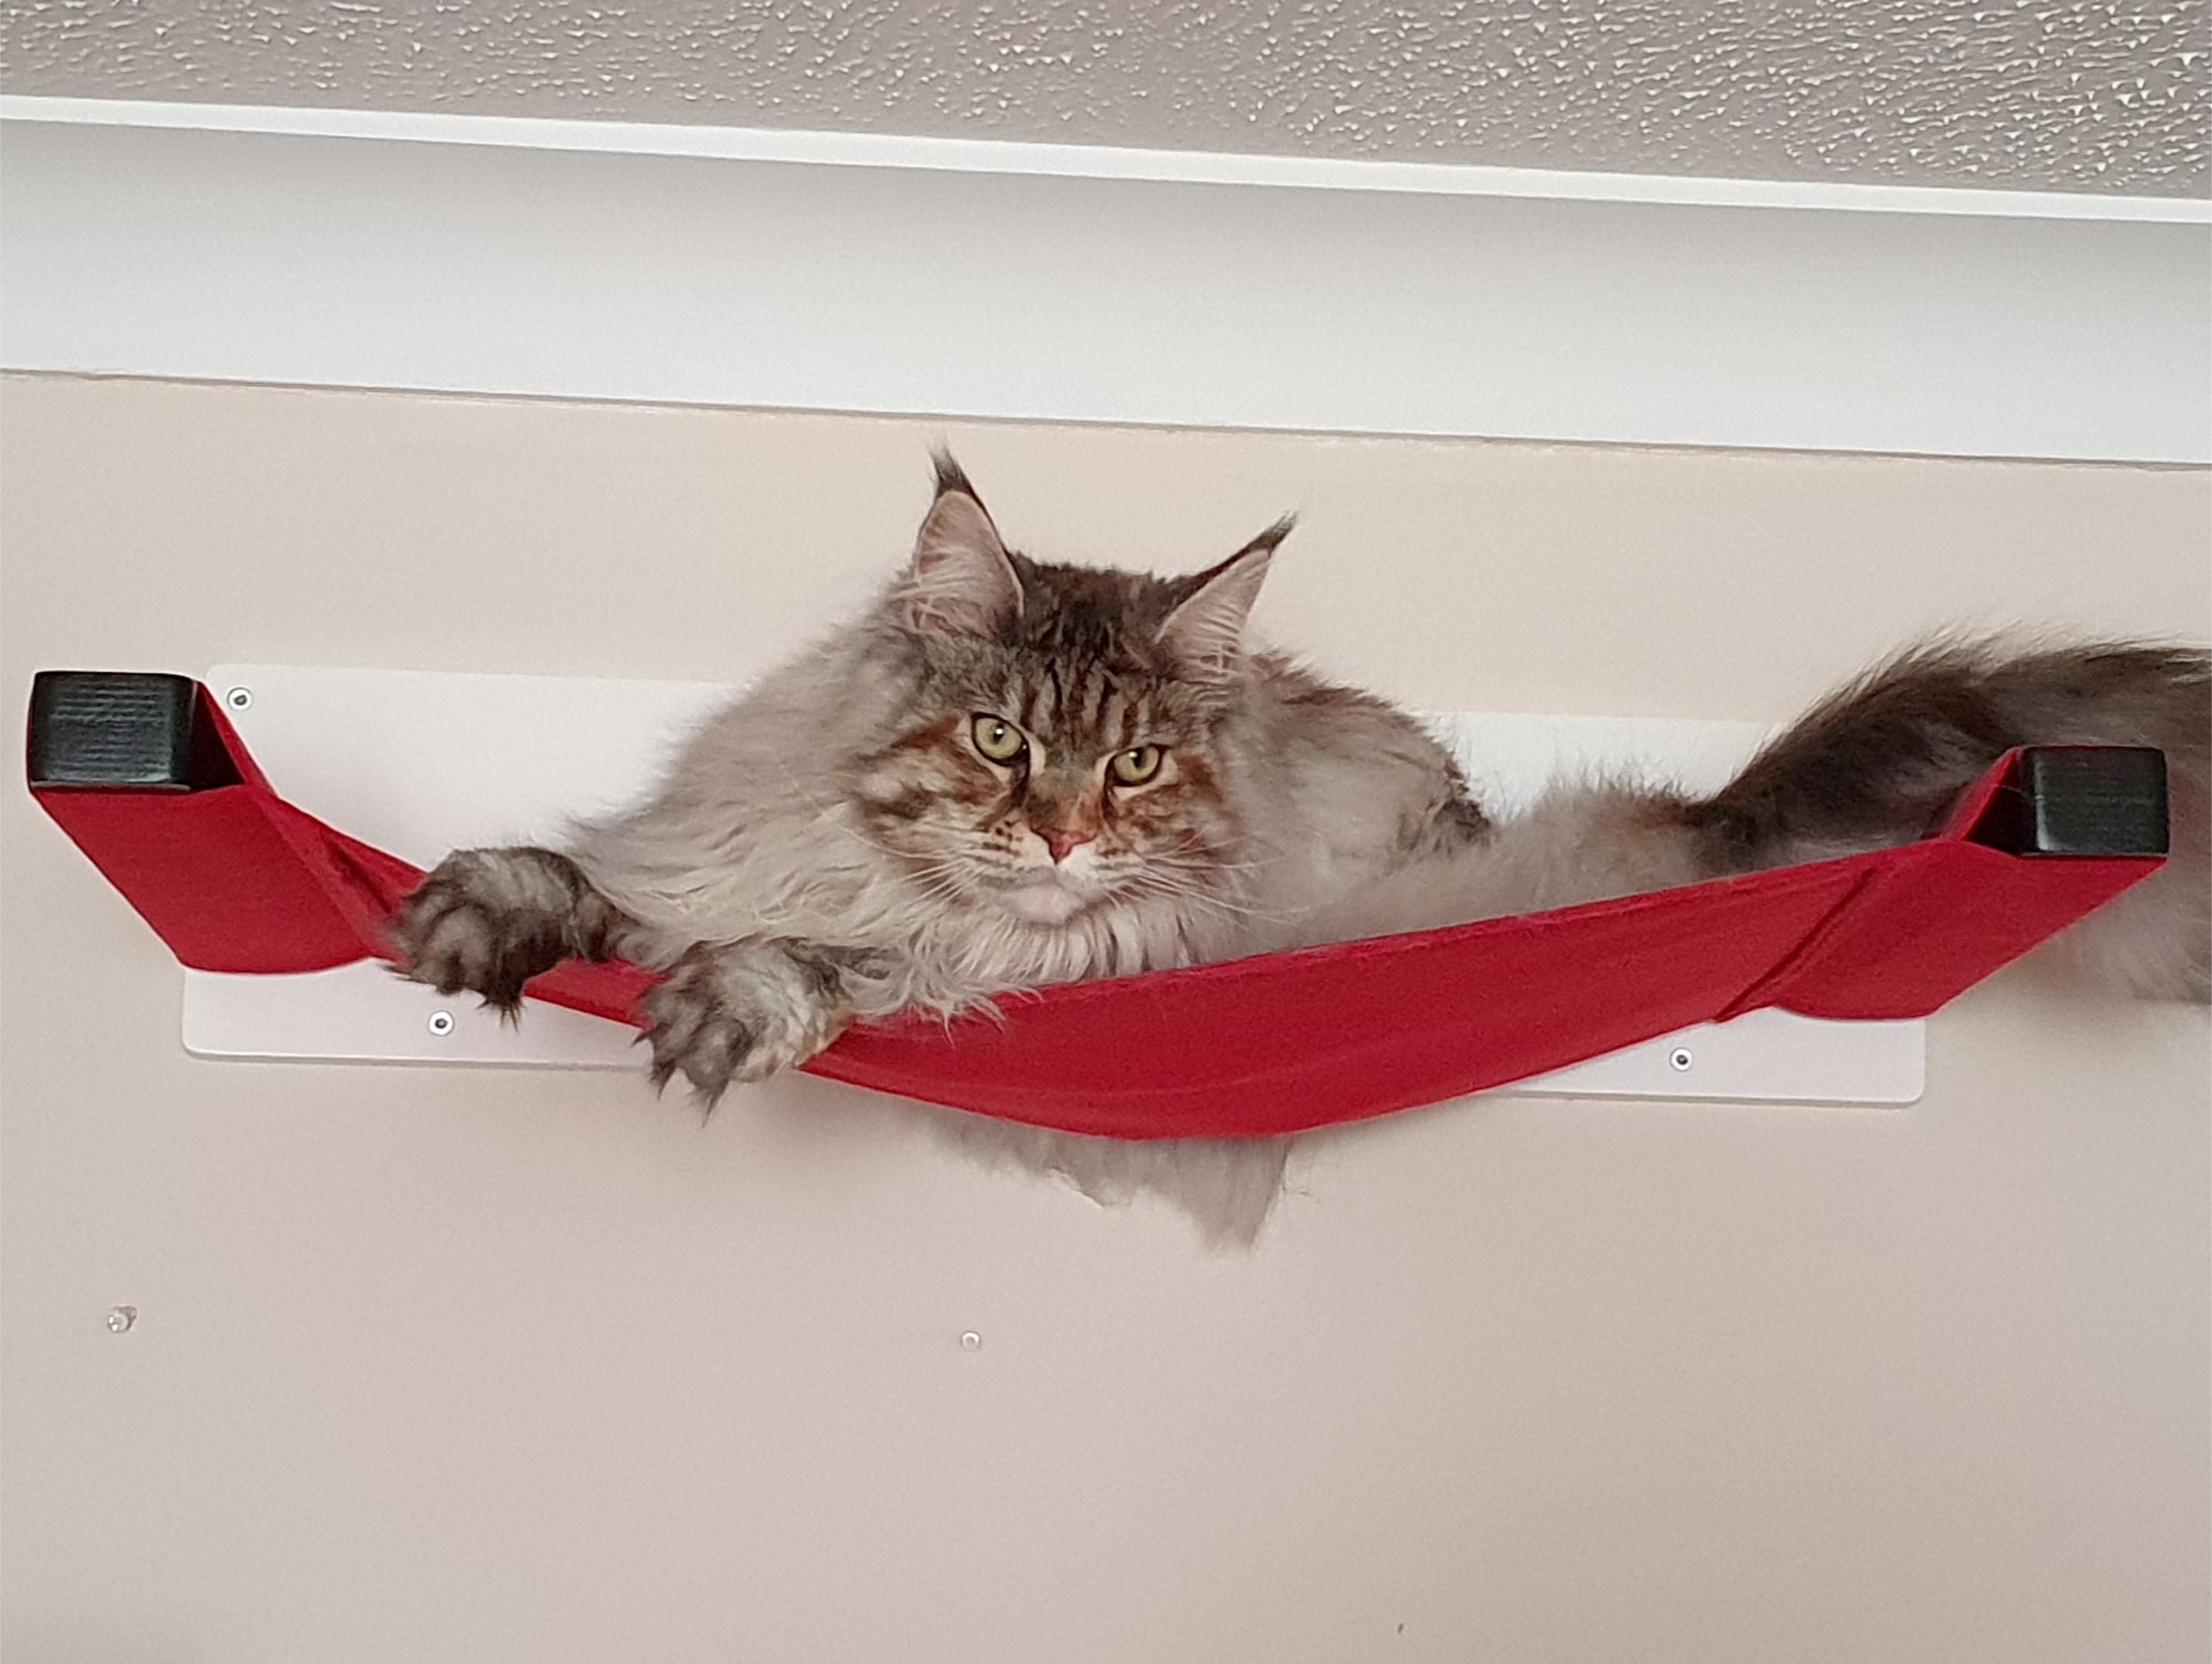 Big Giant Cat Wall Shelf Bed Hammock - Wally Giant Cot - Scratchy Things Premium Pet Furniture